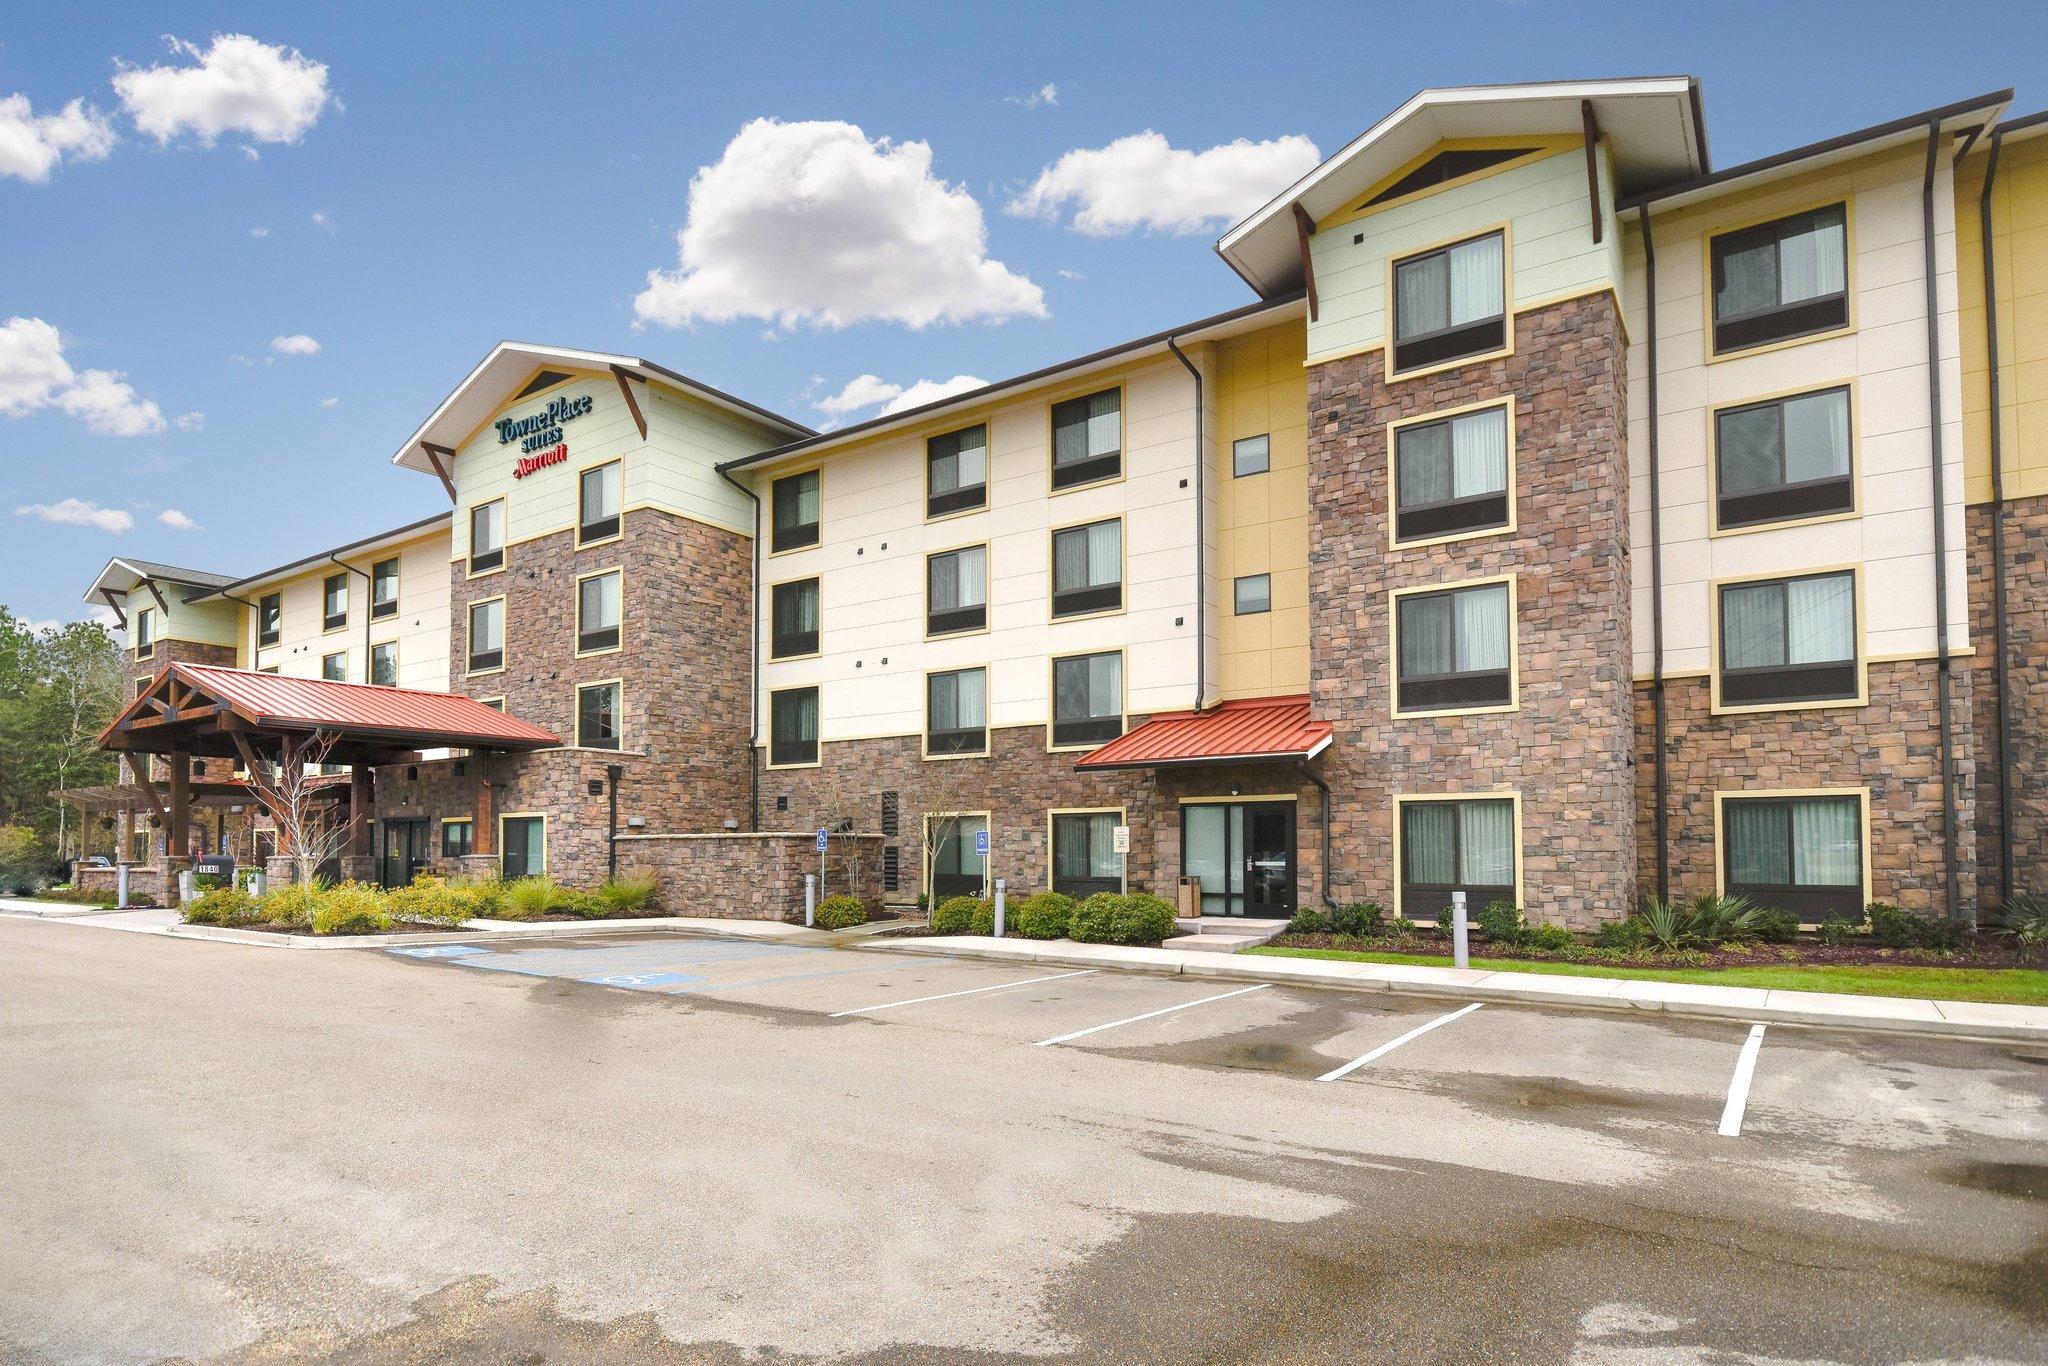 TownePlace Suites Slidell in Slidell, LA